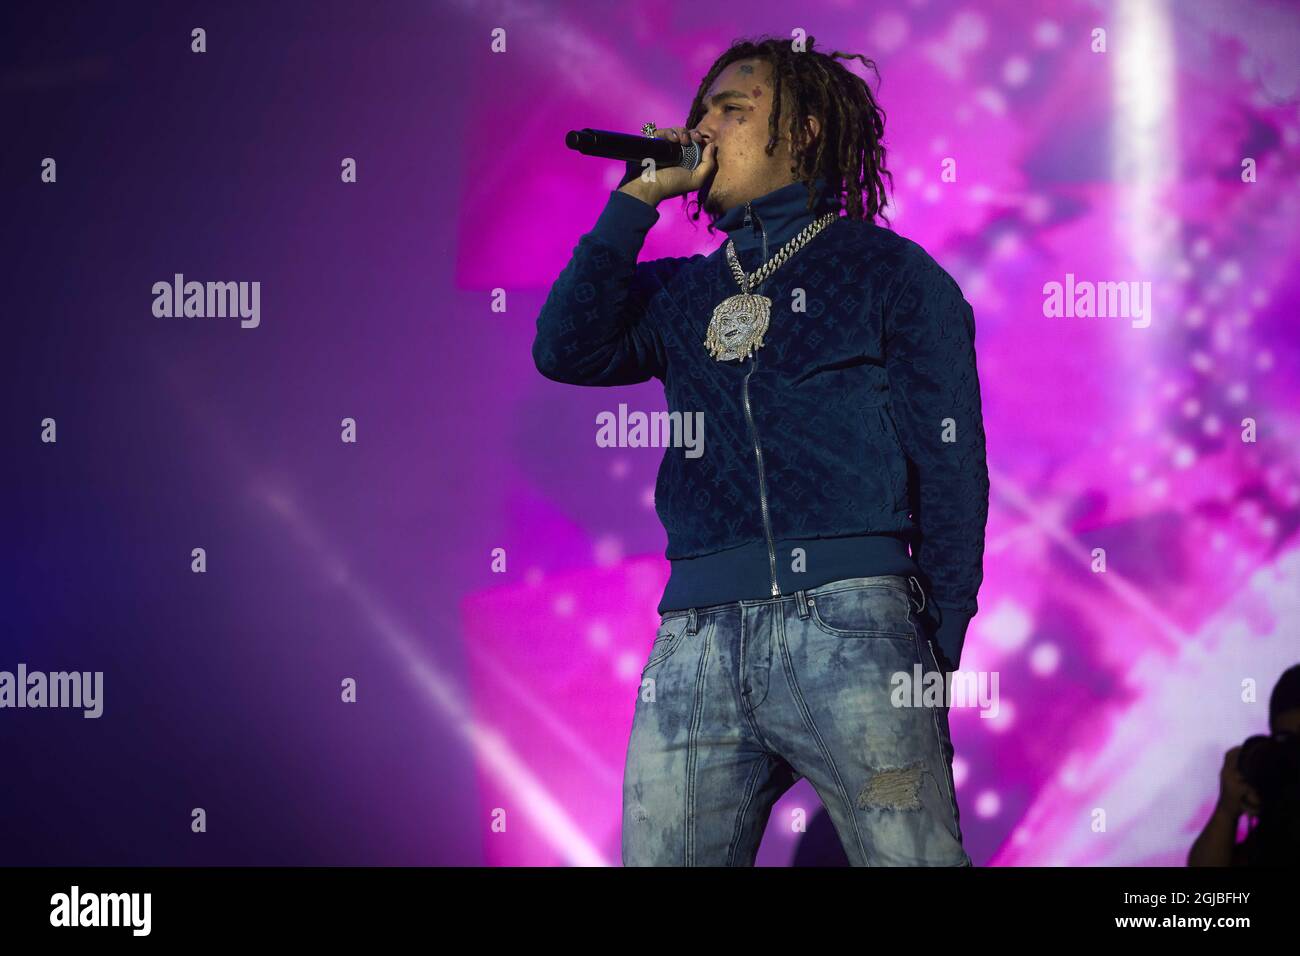 STOCKHOLM 20180814 American rapper Lil Pump performs during the one-day music festival Smash in Stockholm on Aug. 14, 2018. Poto: Fredrik Persson / TT / code 1080  Stock Photo